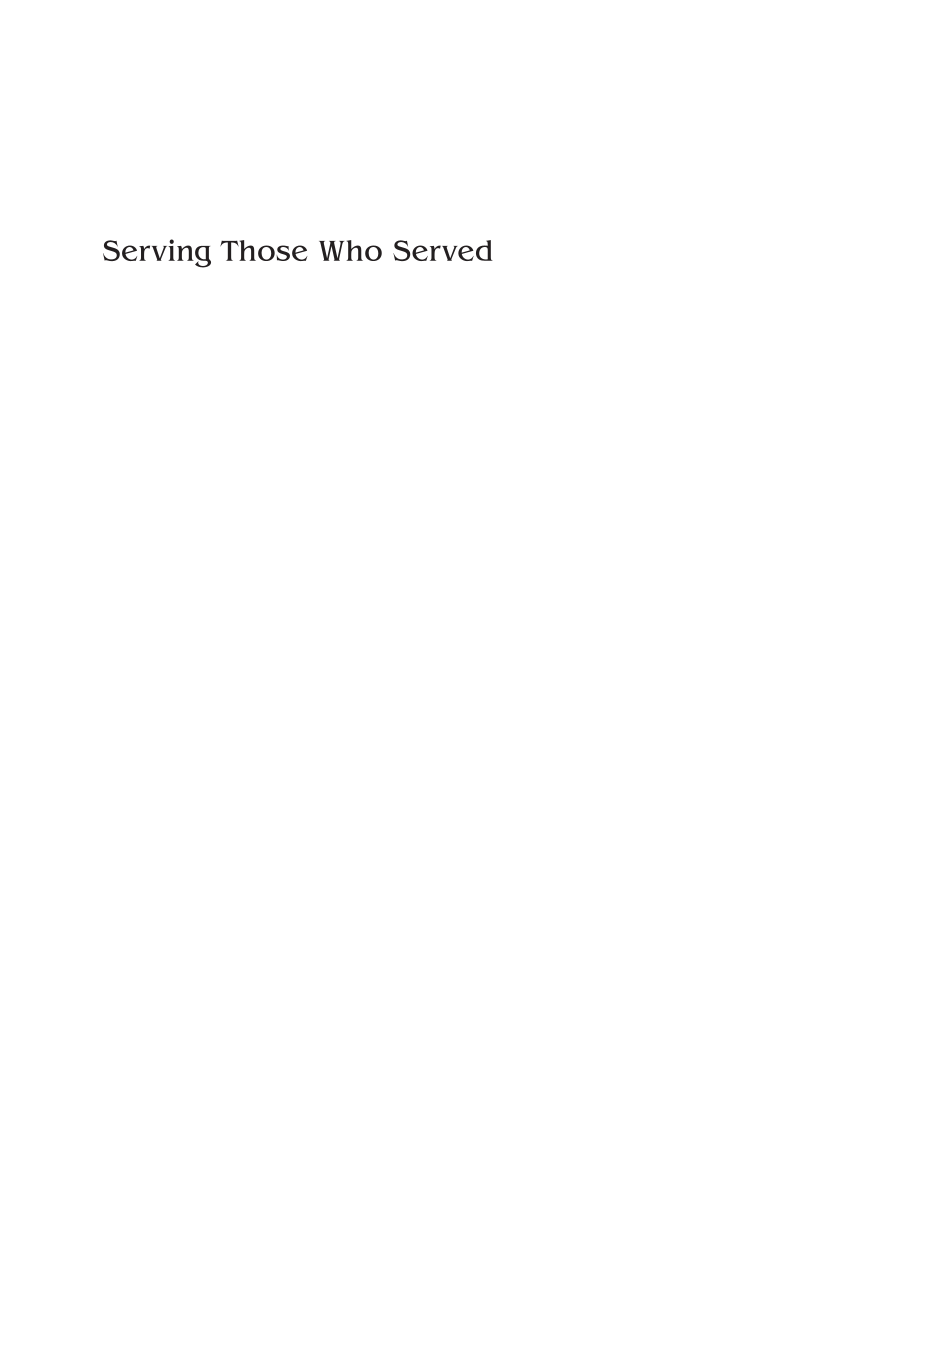 Serving Those Who Served: Librarian's Guide to Working with Veteran and Military Communities page i